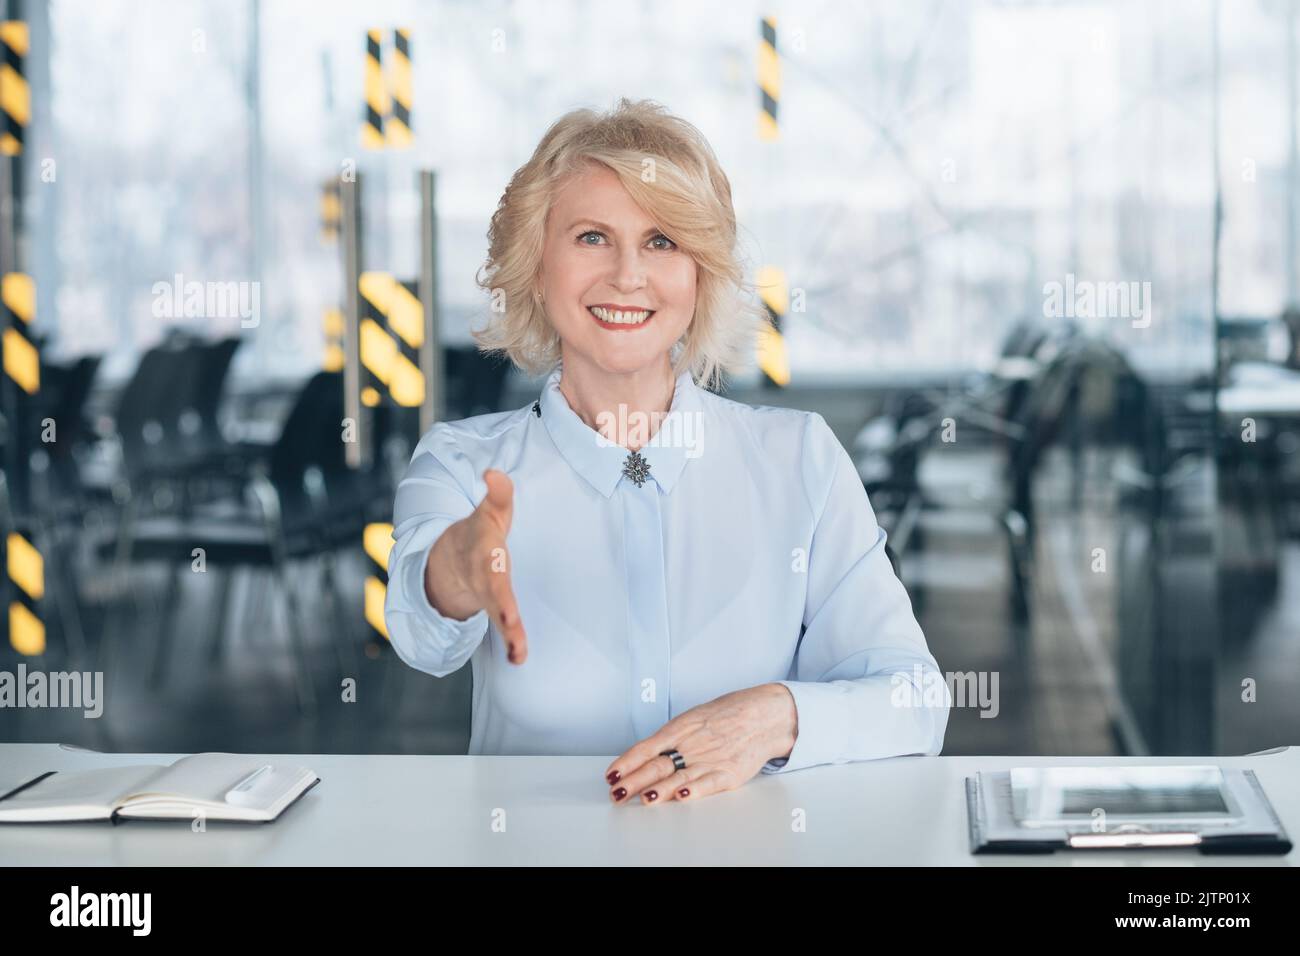 friendly senior lady welcoming successful company Stock Photo